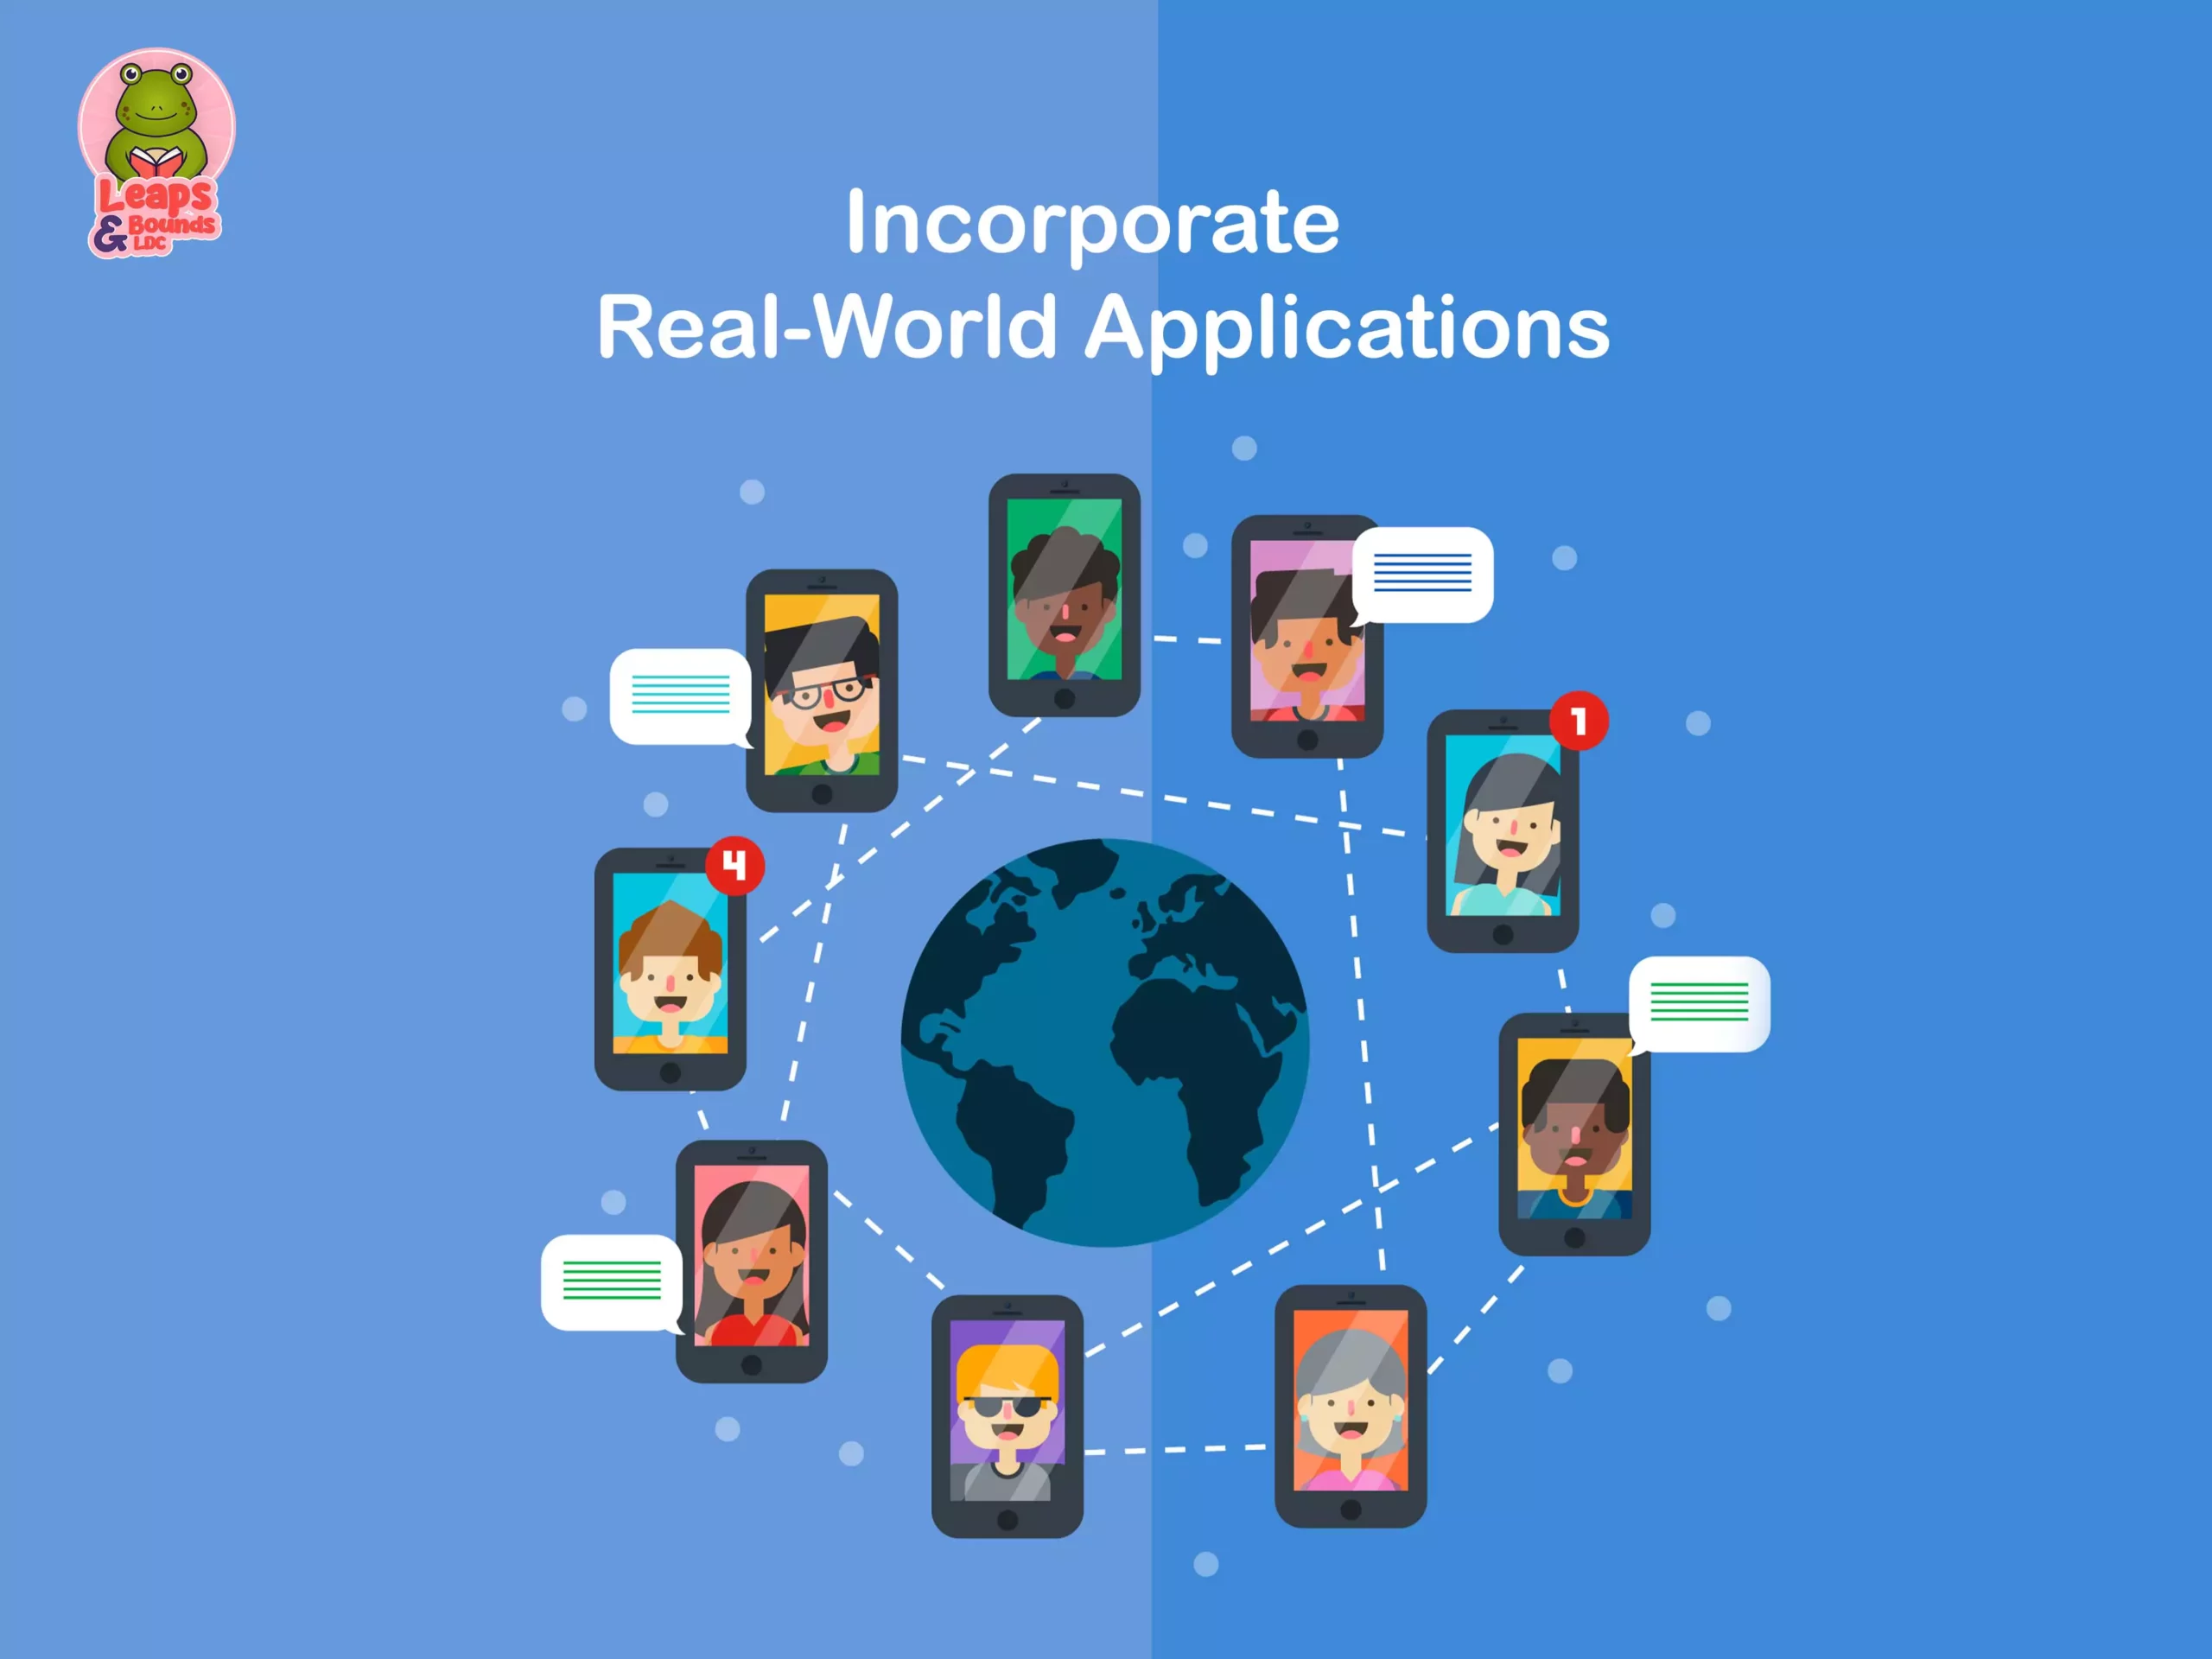 Incorporate Real-World Applications